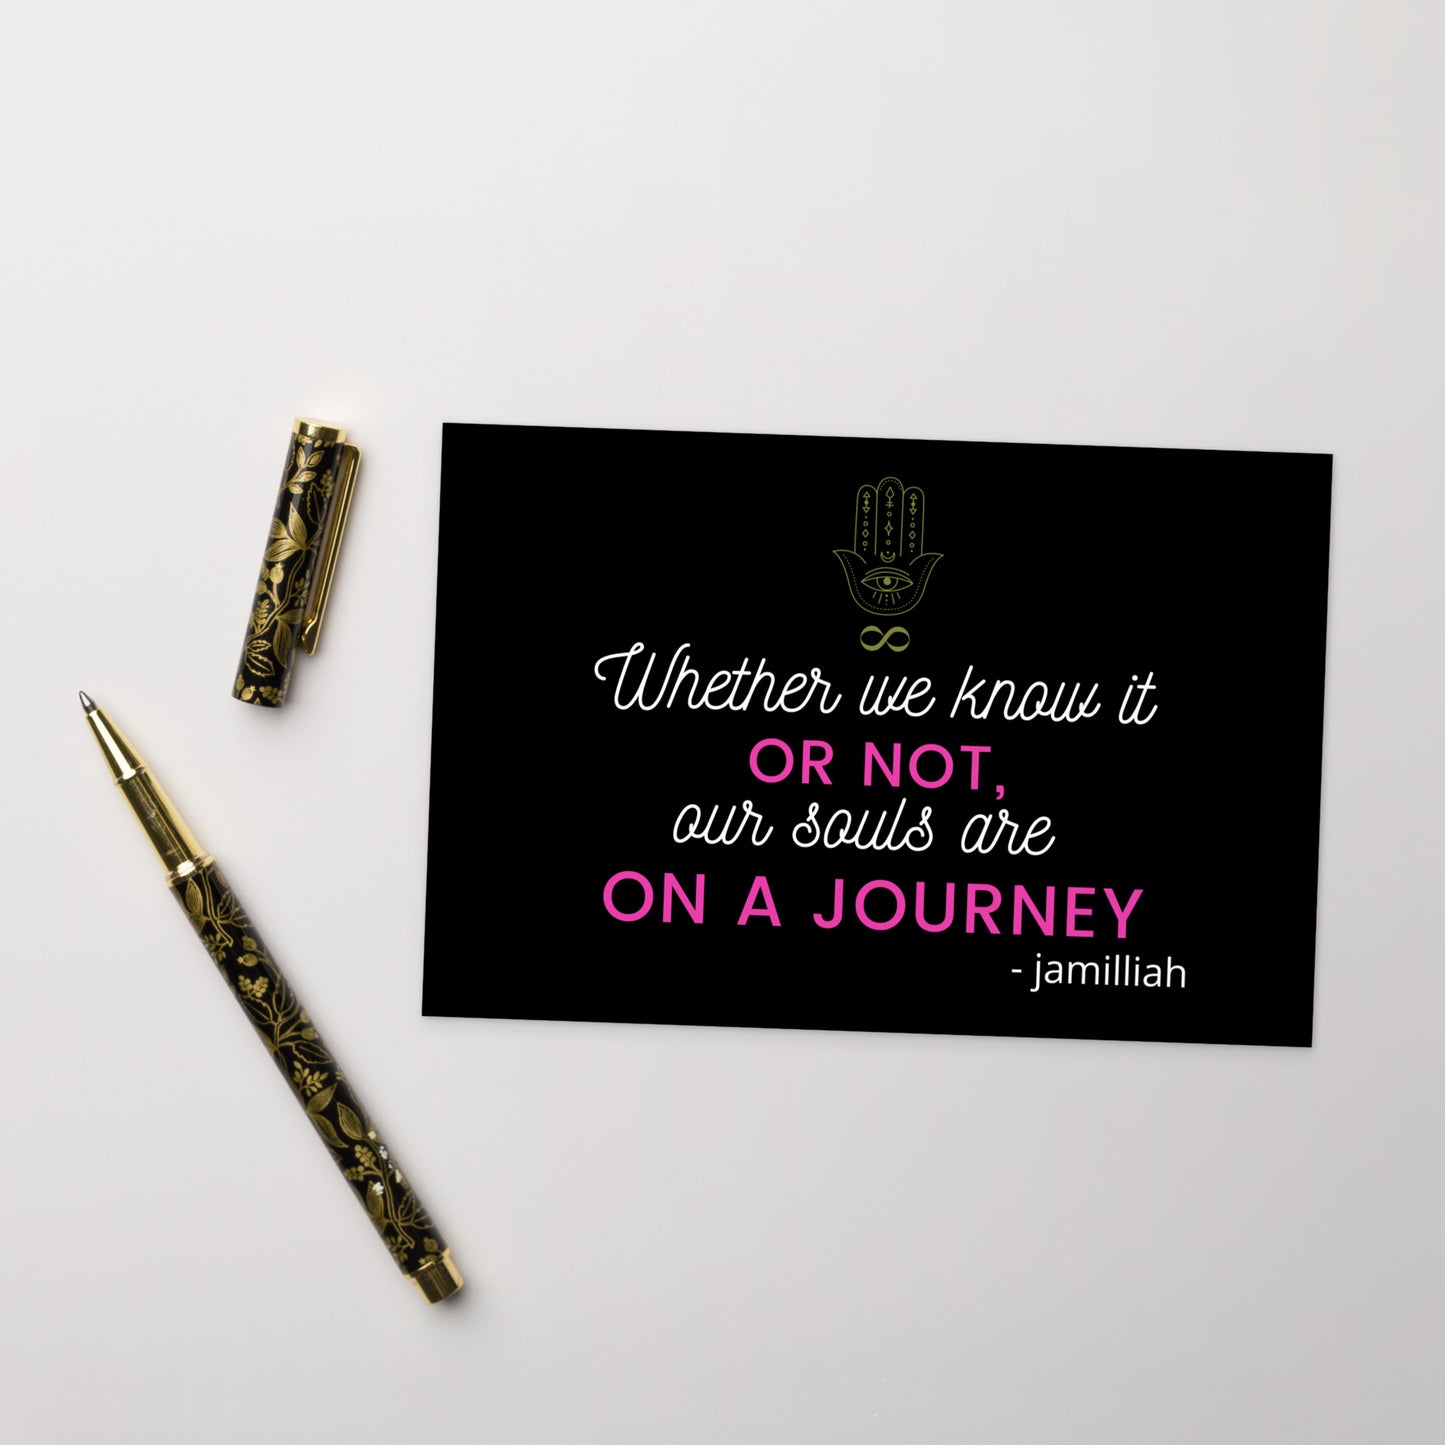 4" x 6", black, glossy, cardboard postcard with pink and white writing, original hamsa hand/infinity symbol brand logo, and wise quote mantra/saying/motto/tagline. "Whether We Know It Or Not, Our Souls Are On A Journey" - Jamilliah. Slogan is "JAMILLIAH'S THE SOUL-PATH JOURNEY PODCAST" tagline. Shown with fancy pen and cap. JAMILLIAH'S WISDOM IS TIMELESS SHOP - wisdomistimeless.com.